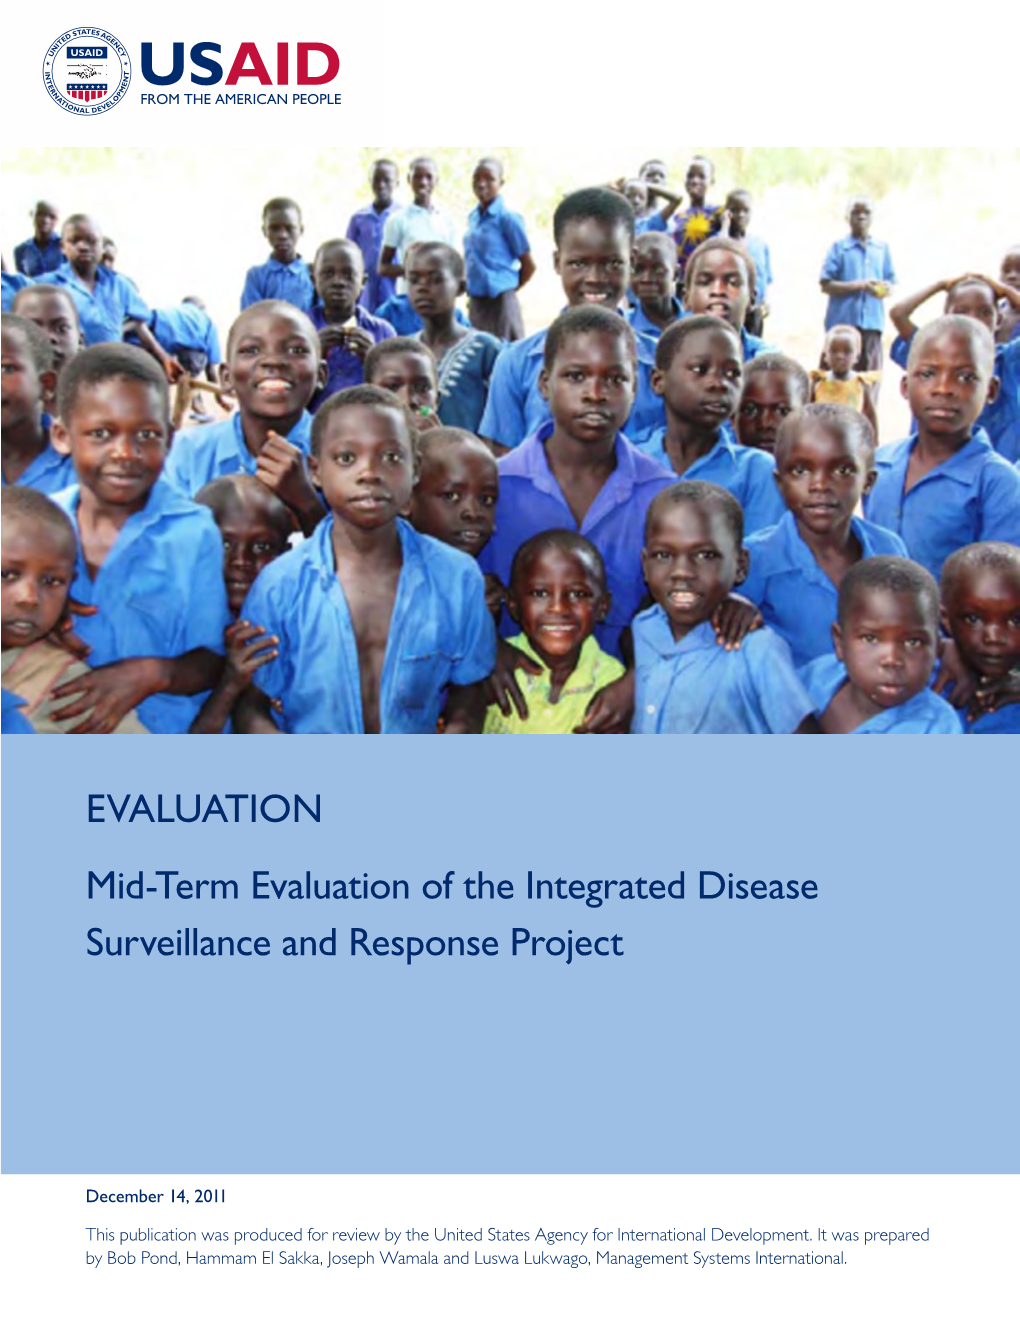 EVALUATION Mid-Term Evaluation of the Integrated Disease Surveillance and Response Project